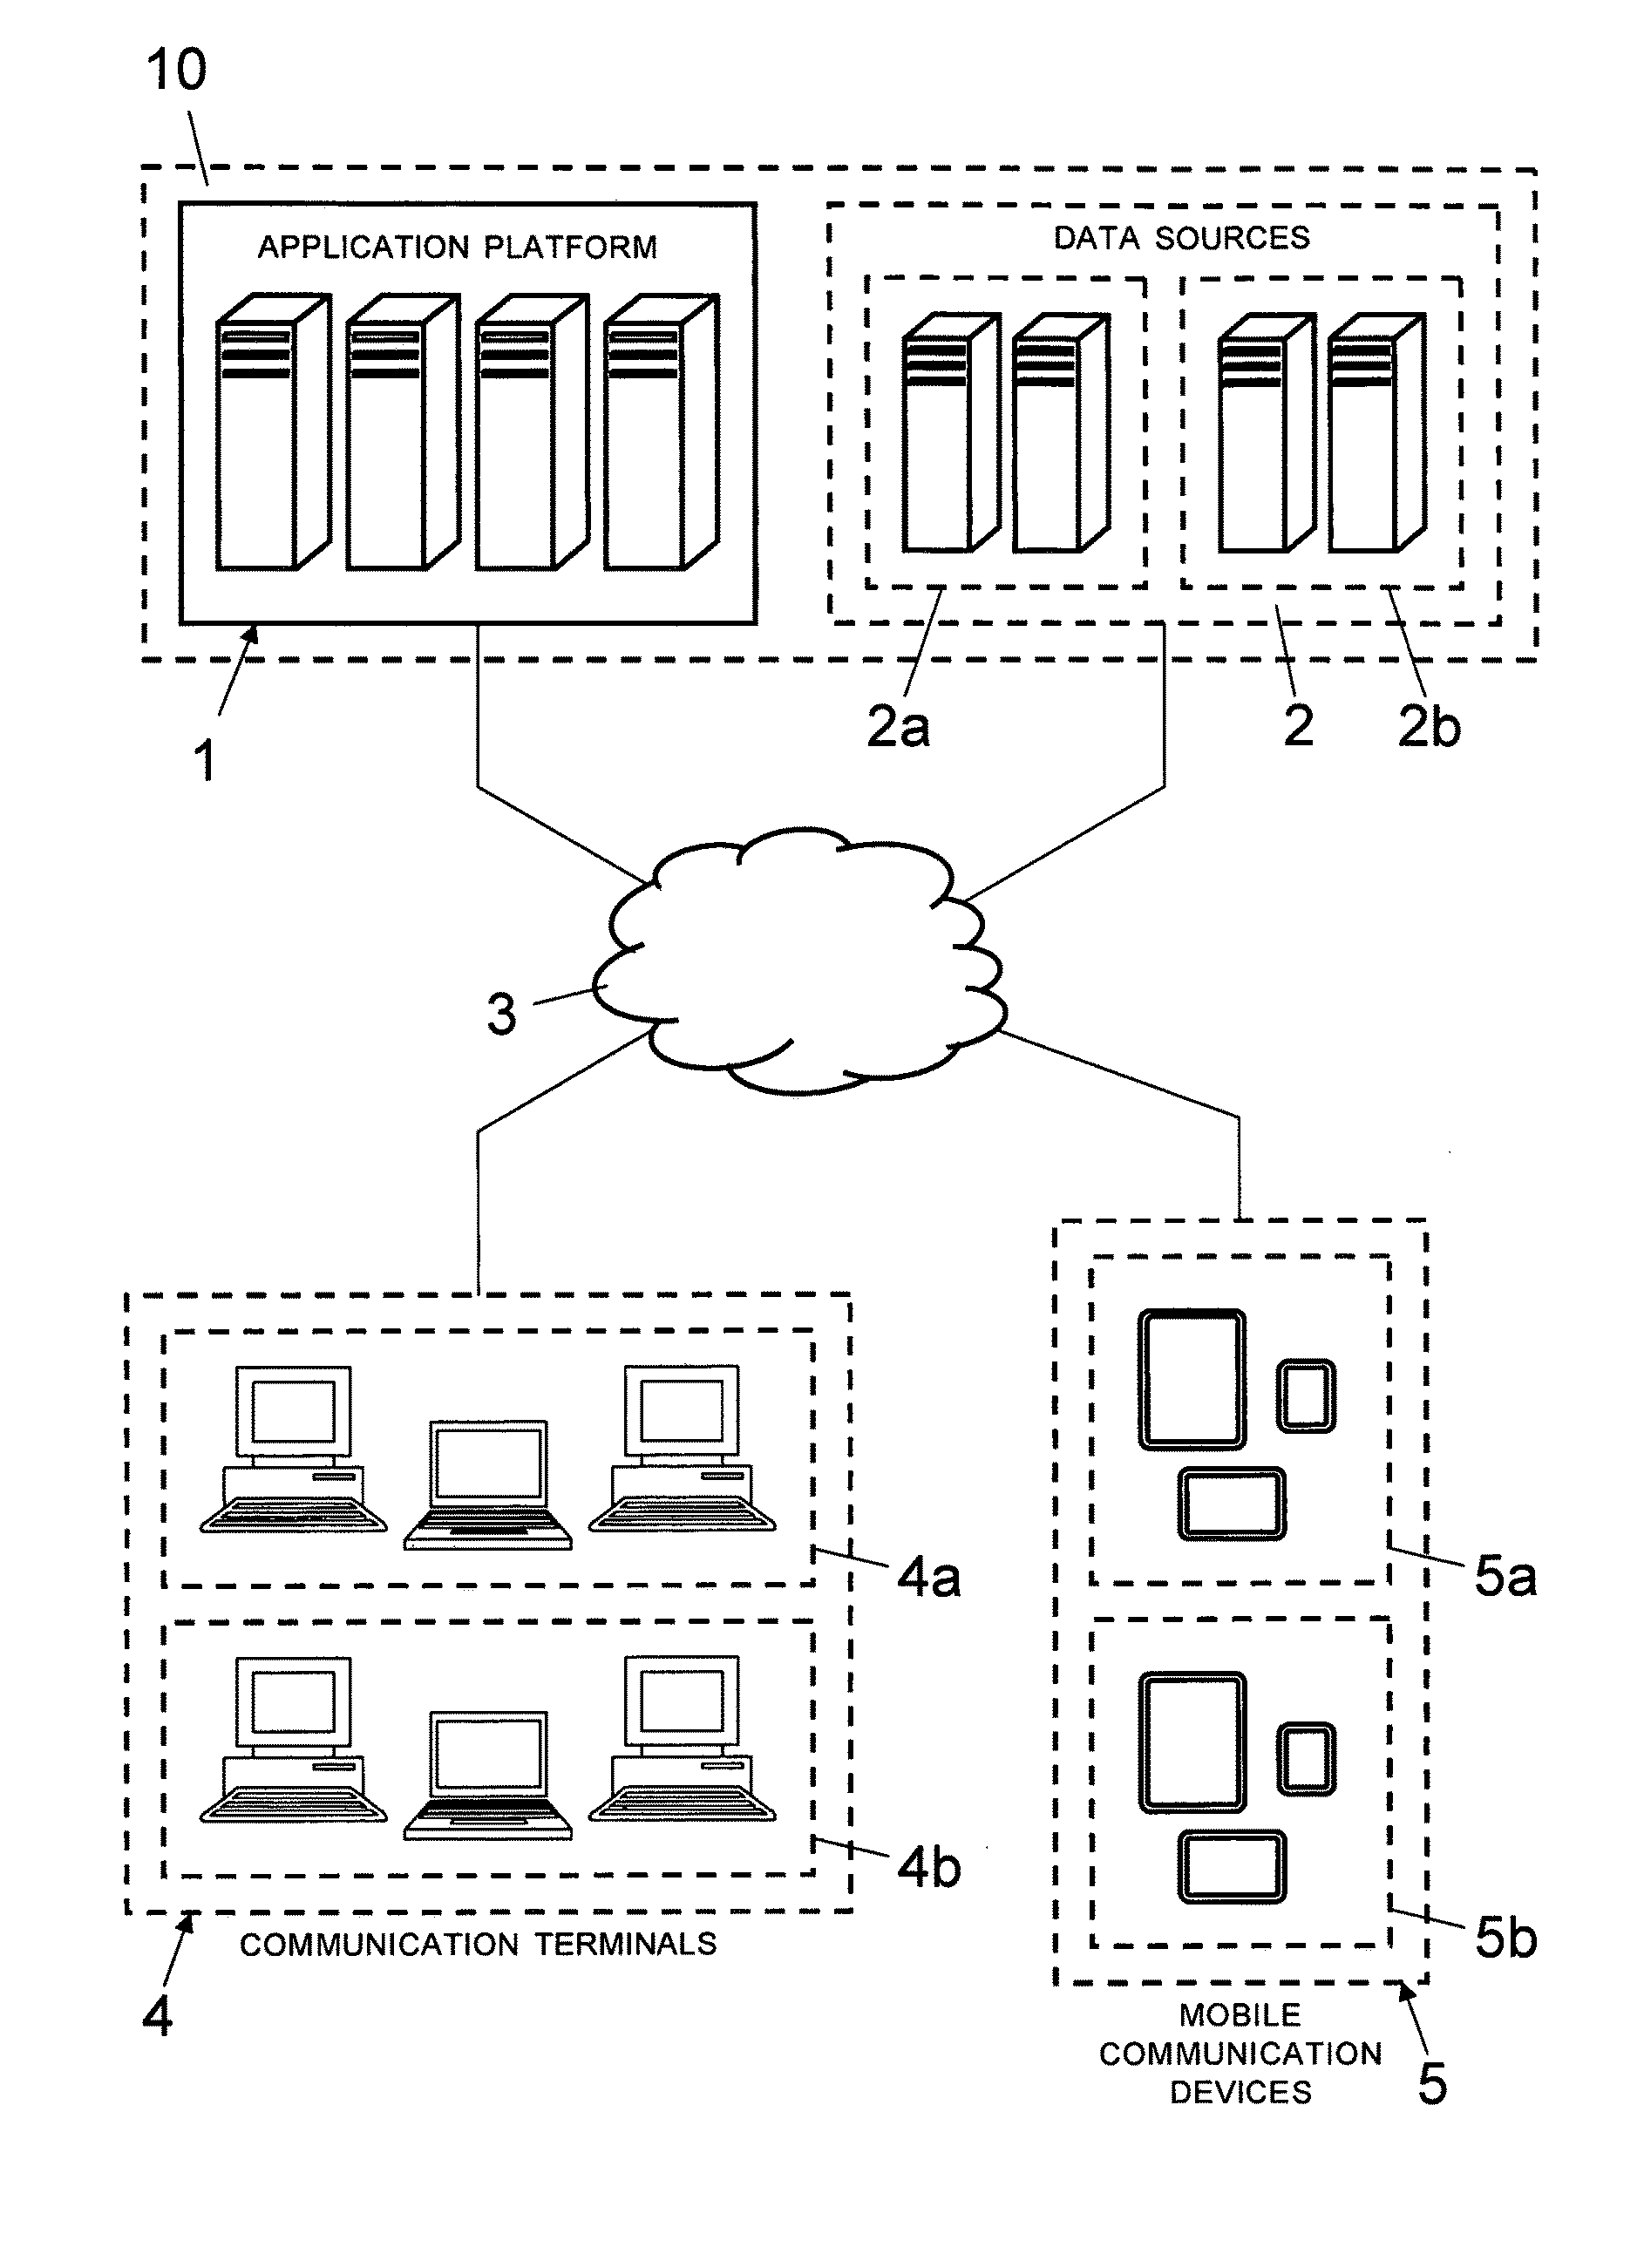 System and method for testing data representation for different mobile devices